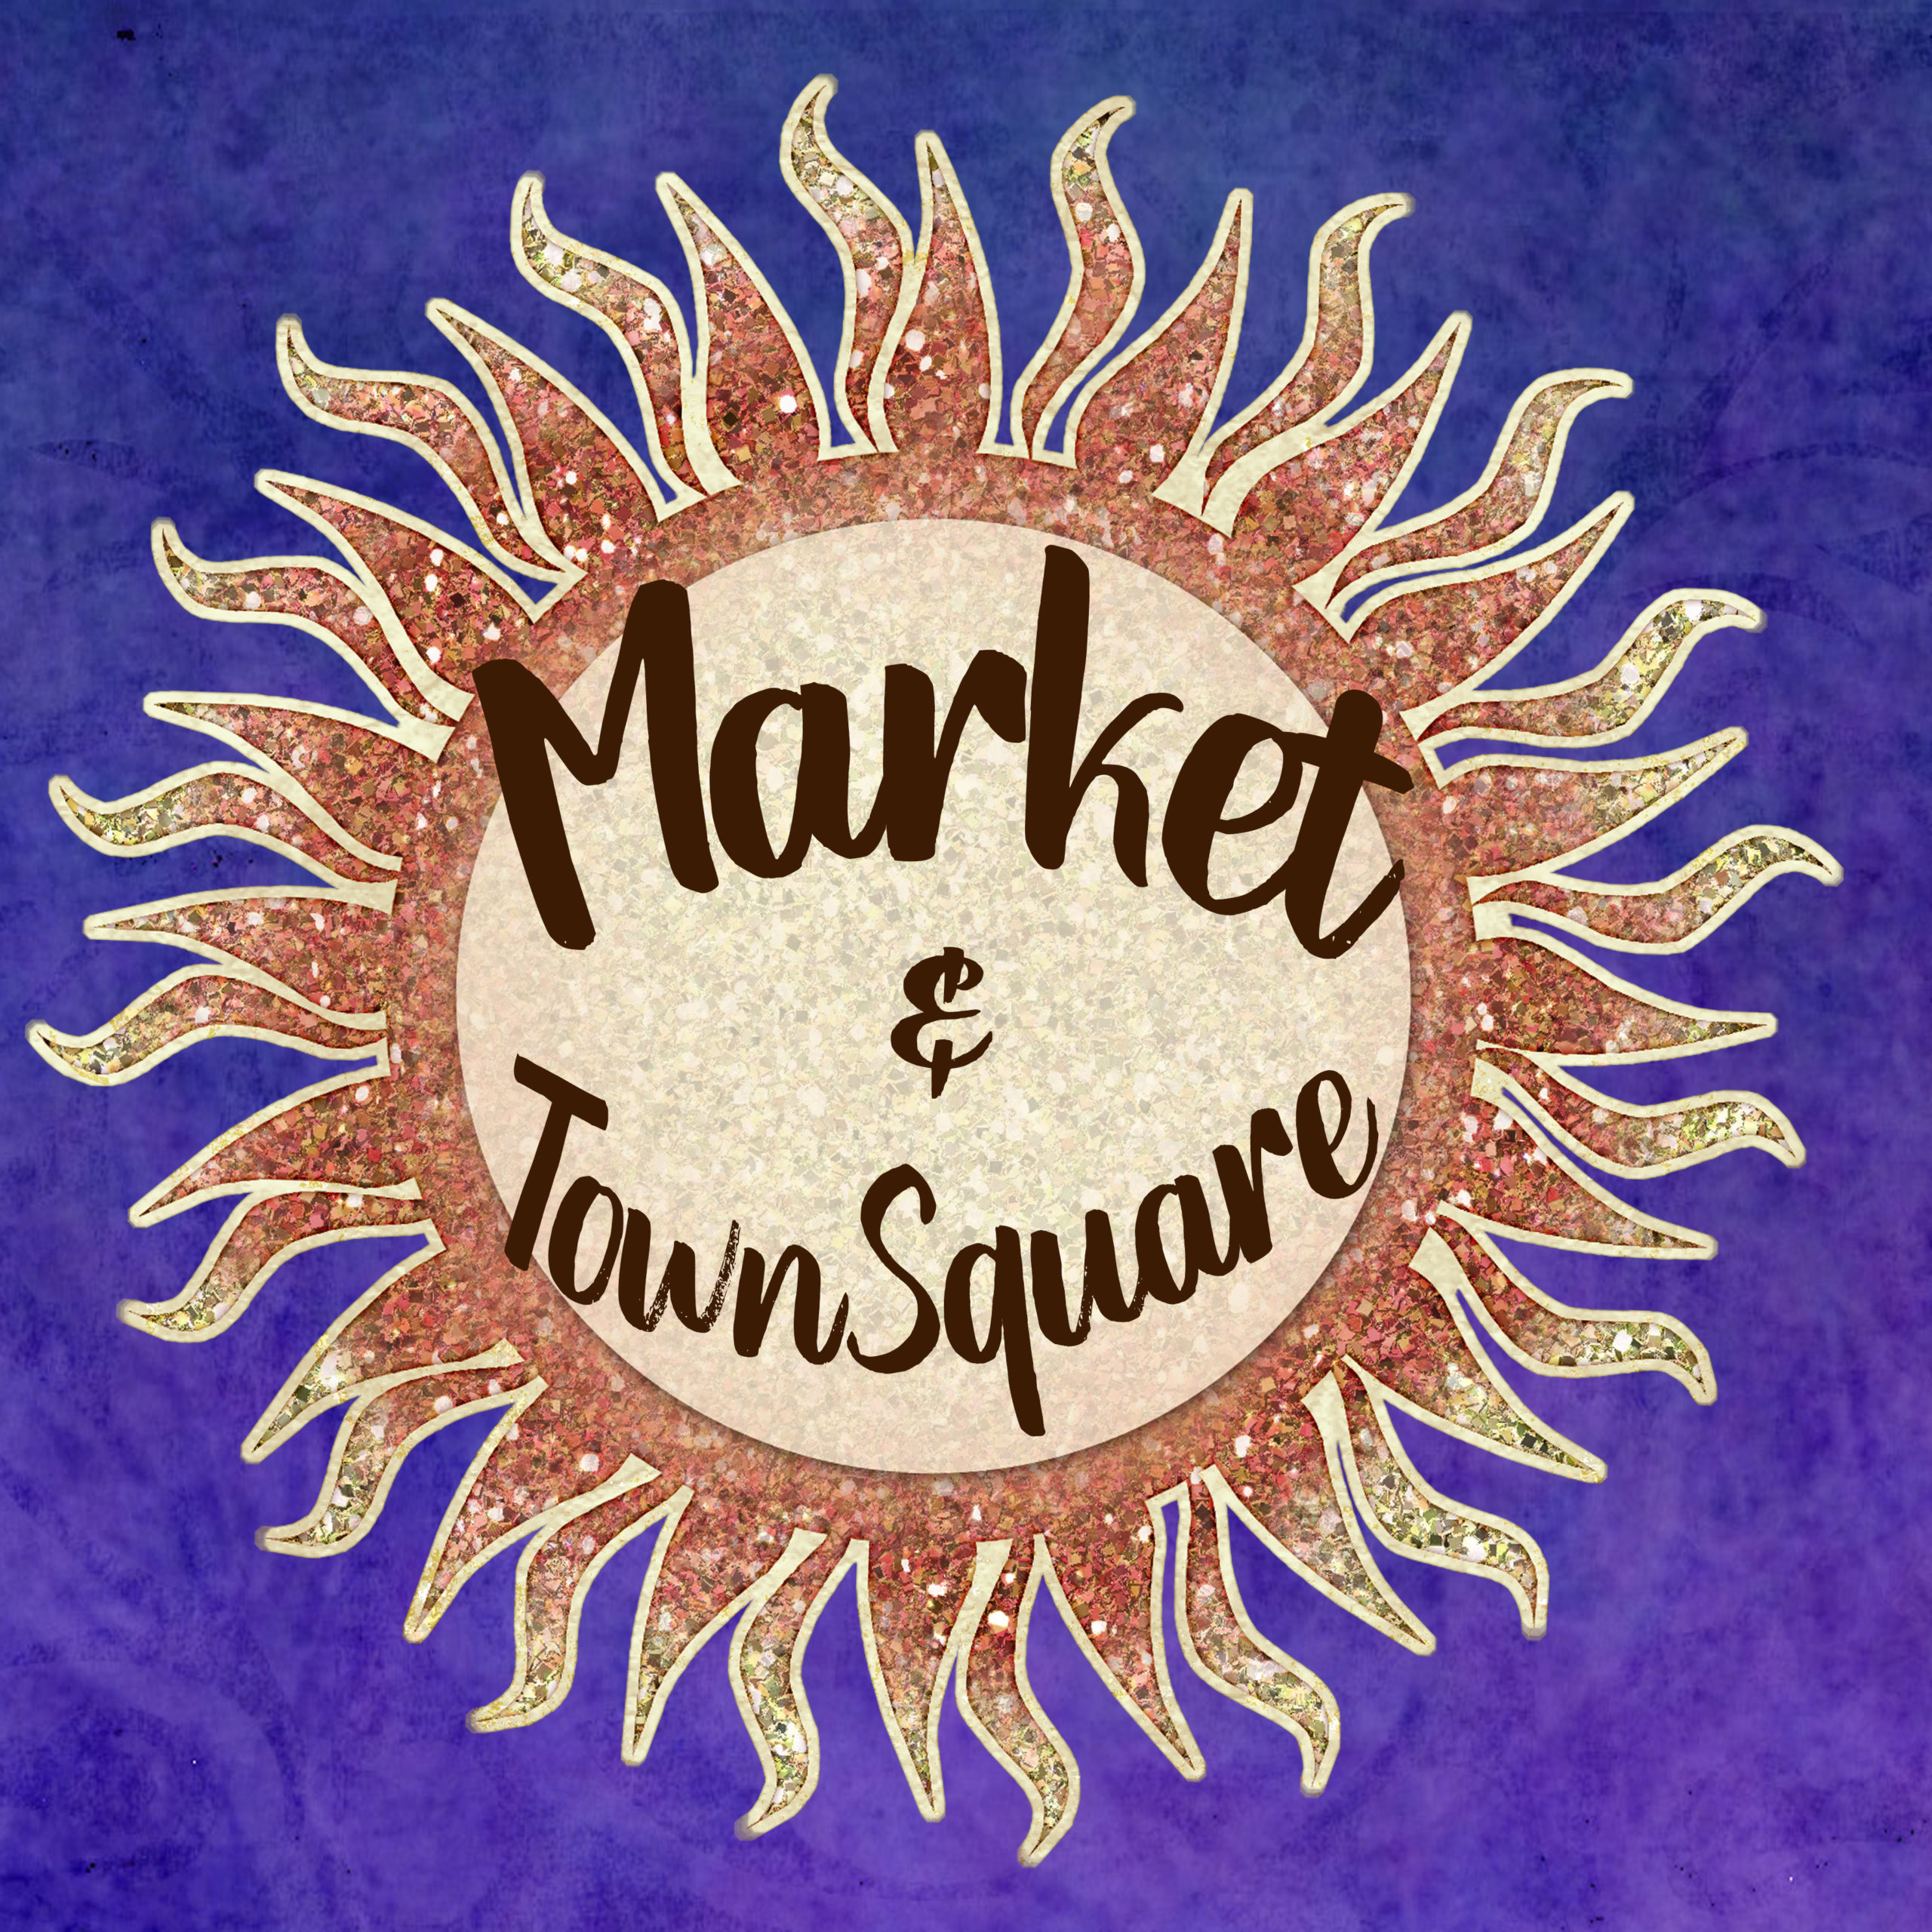 Link to Vendors, Market and Town Square Zoom meeting